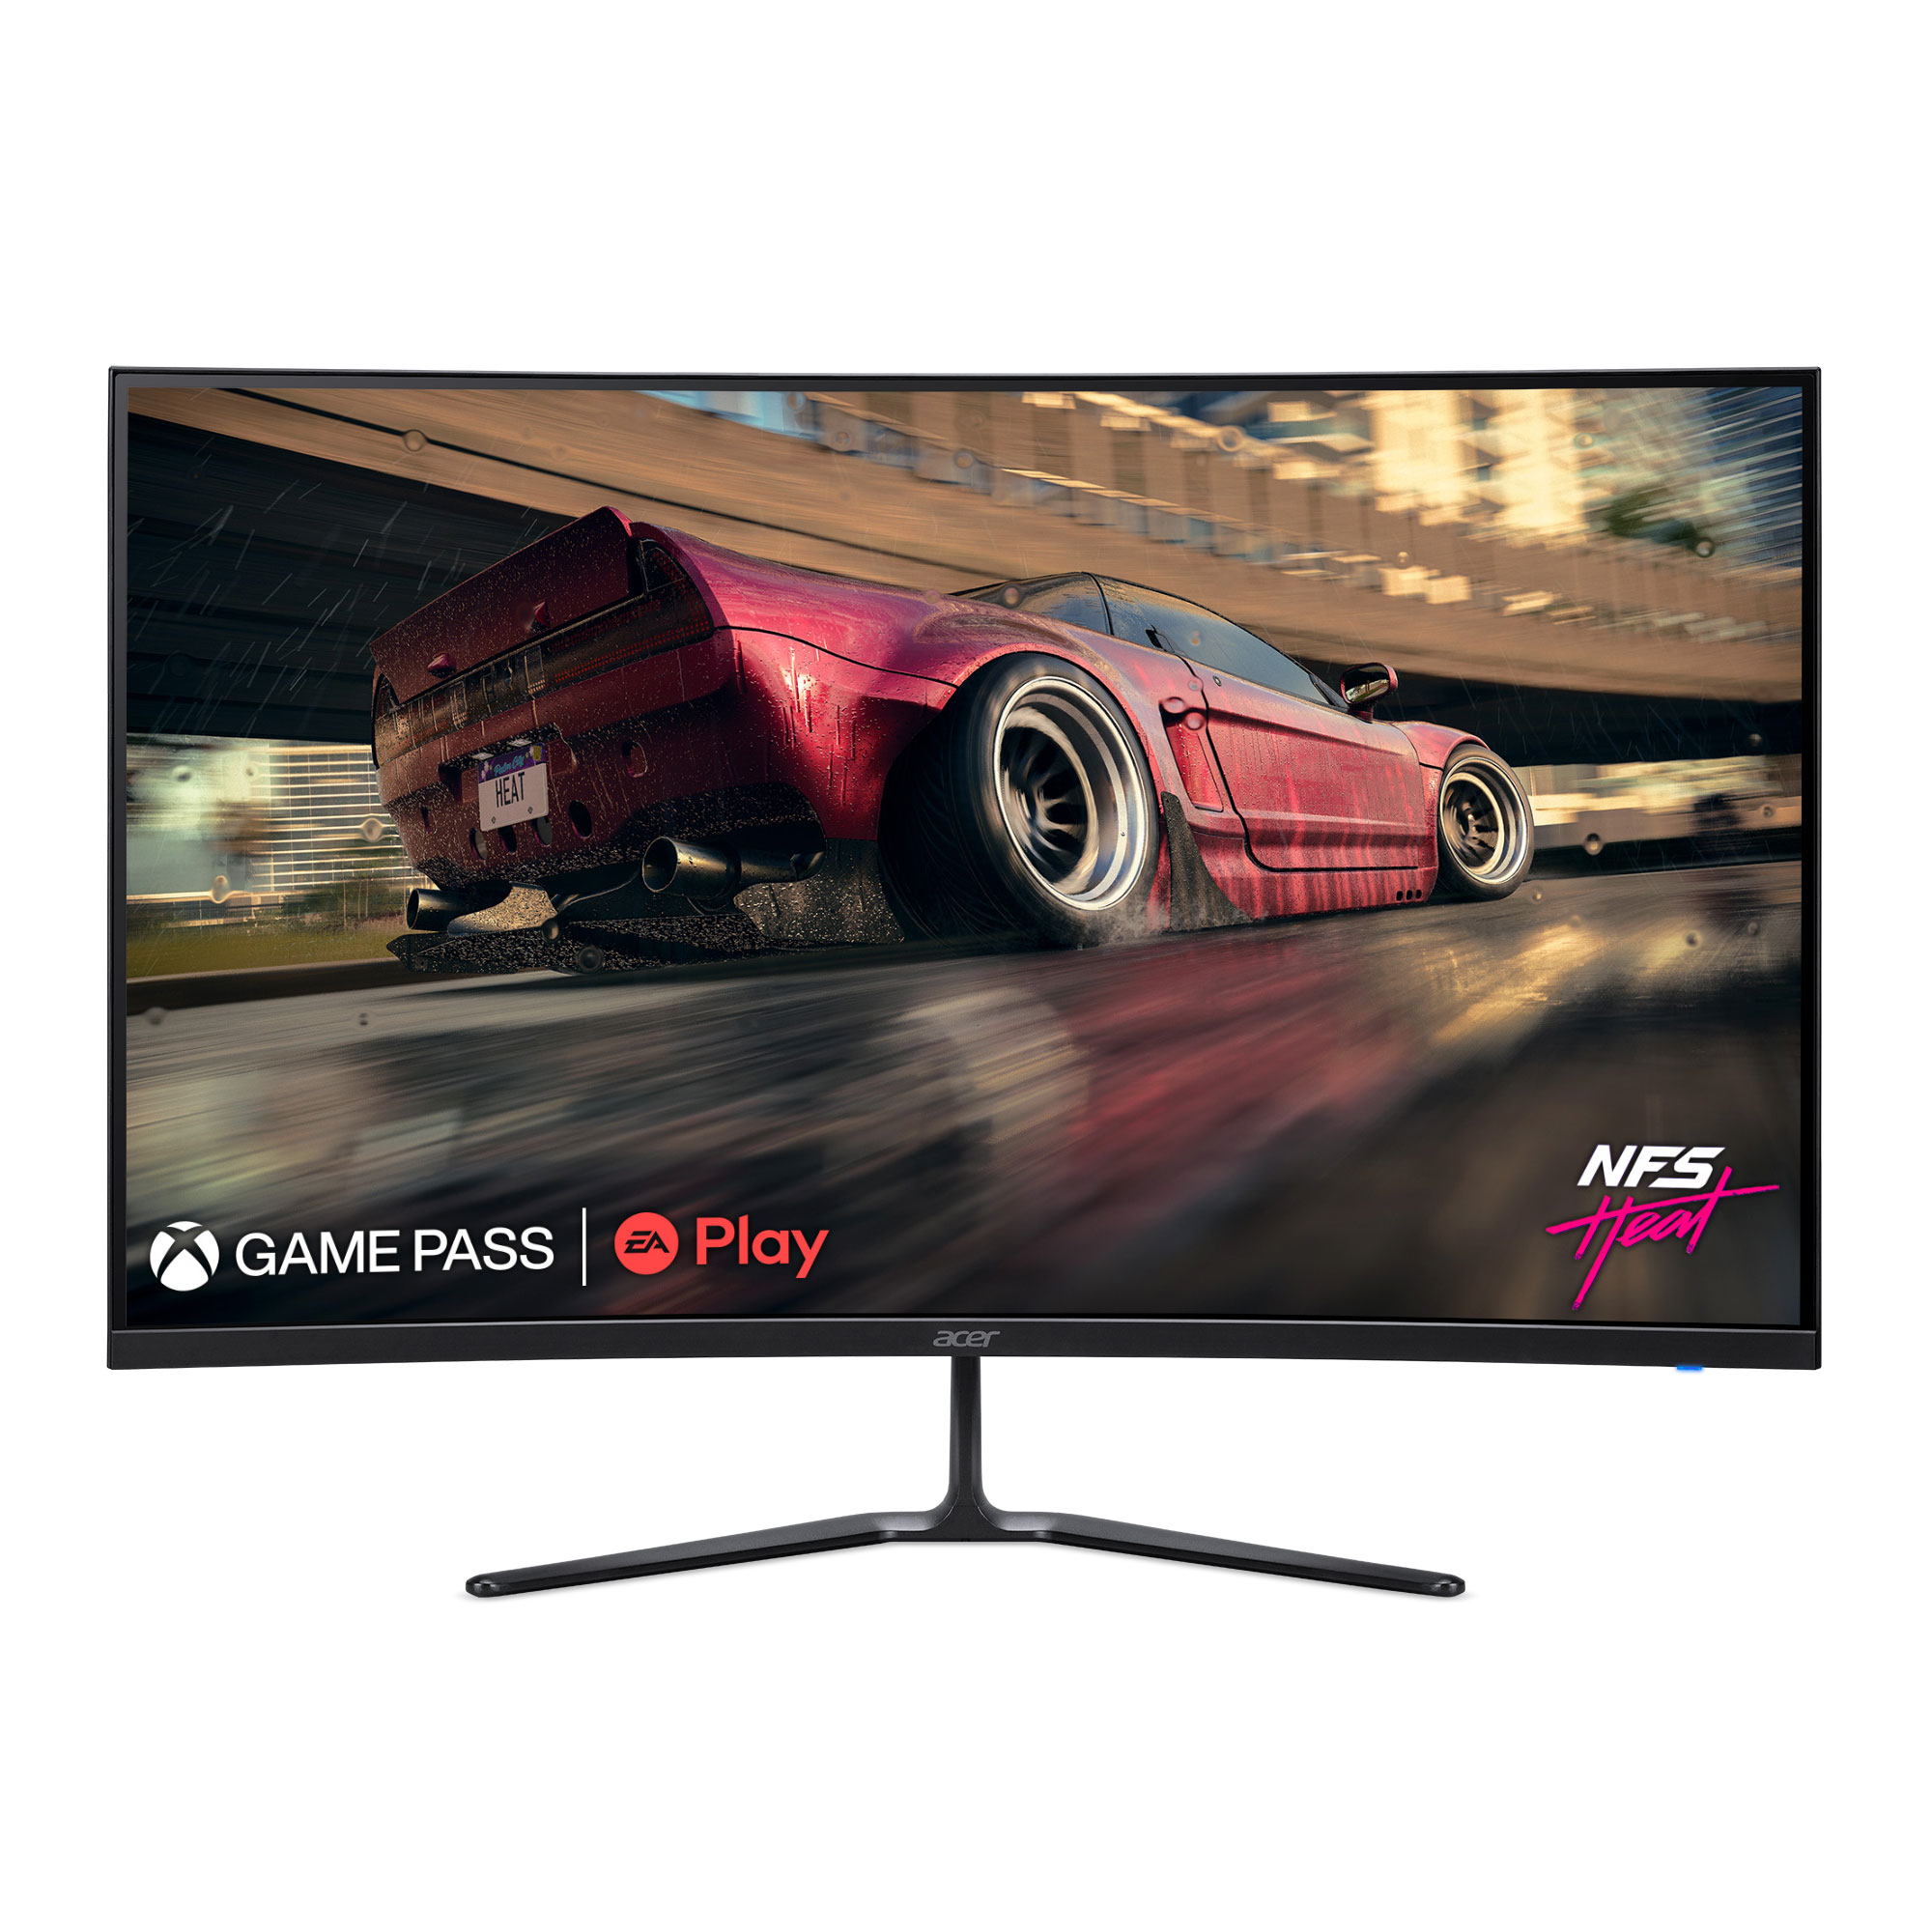 Acer Nitro 31.5" 1500R Curved Full HD (1920 x 1080) Gaming Monitor, Black, ED320QR S3biipx - image 1 of 8